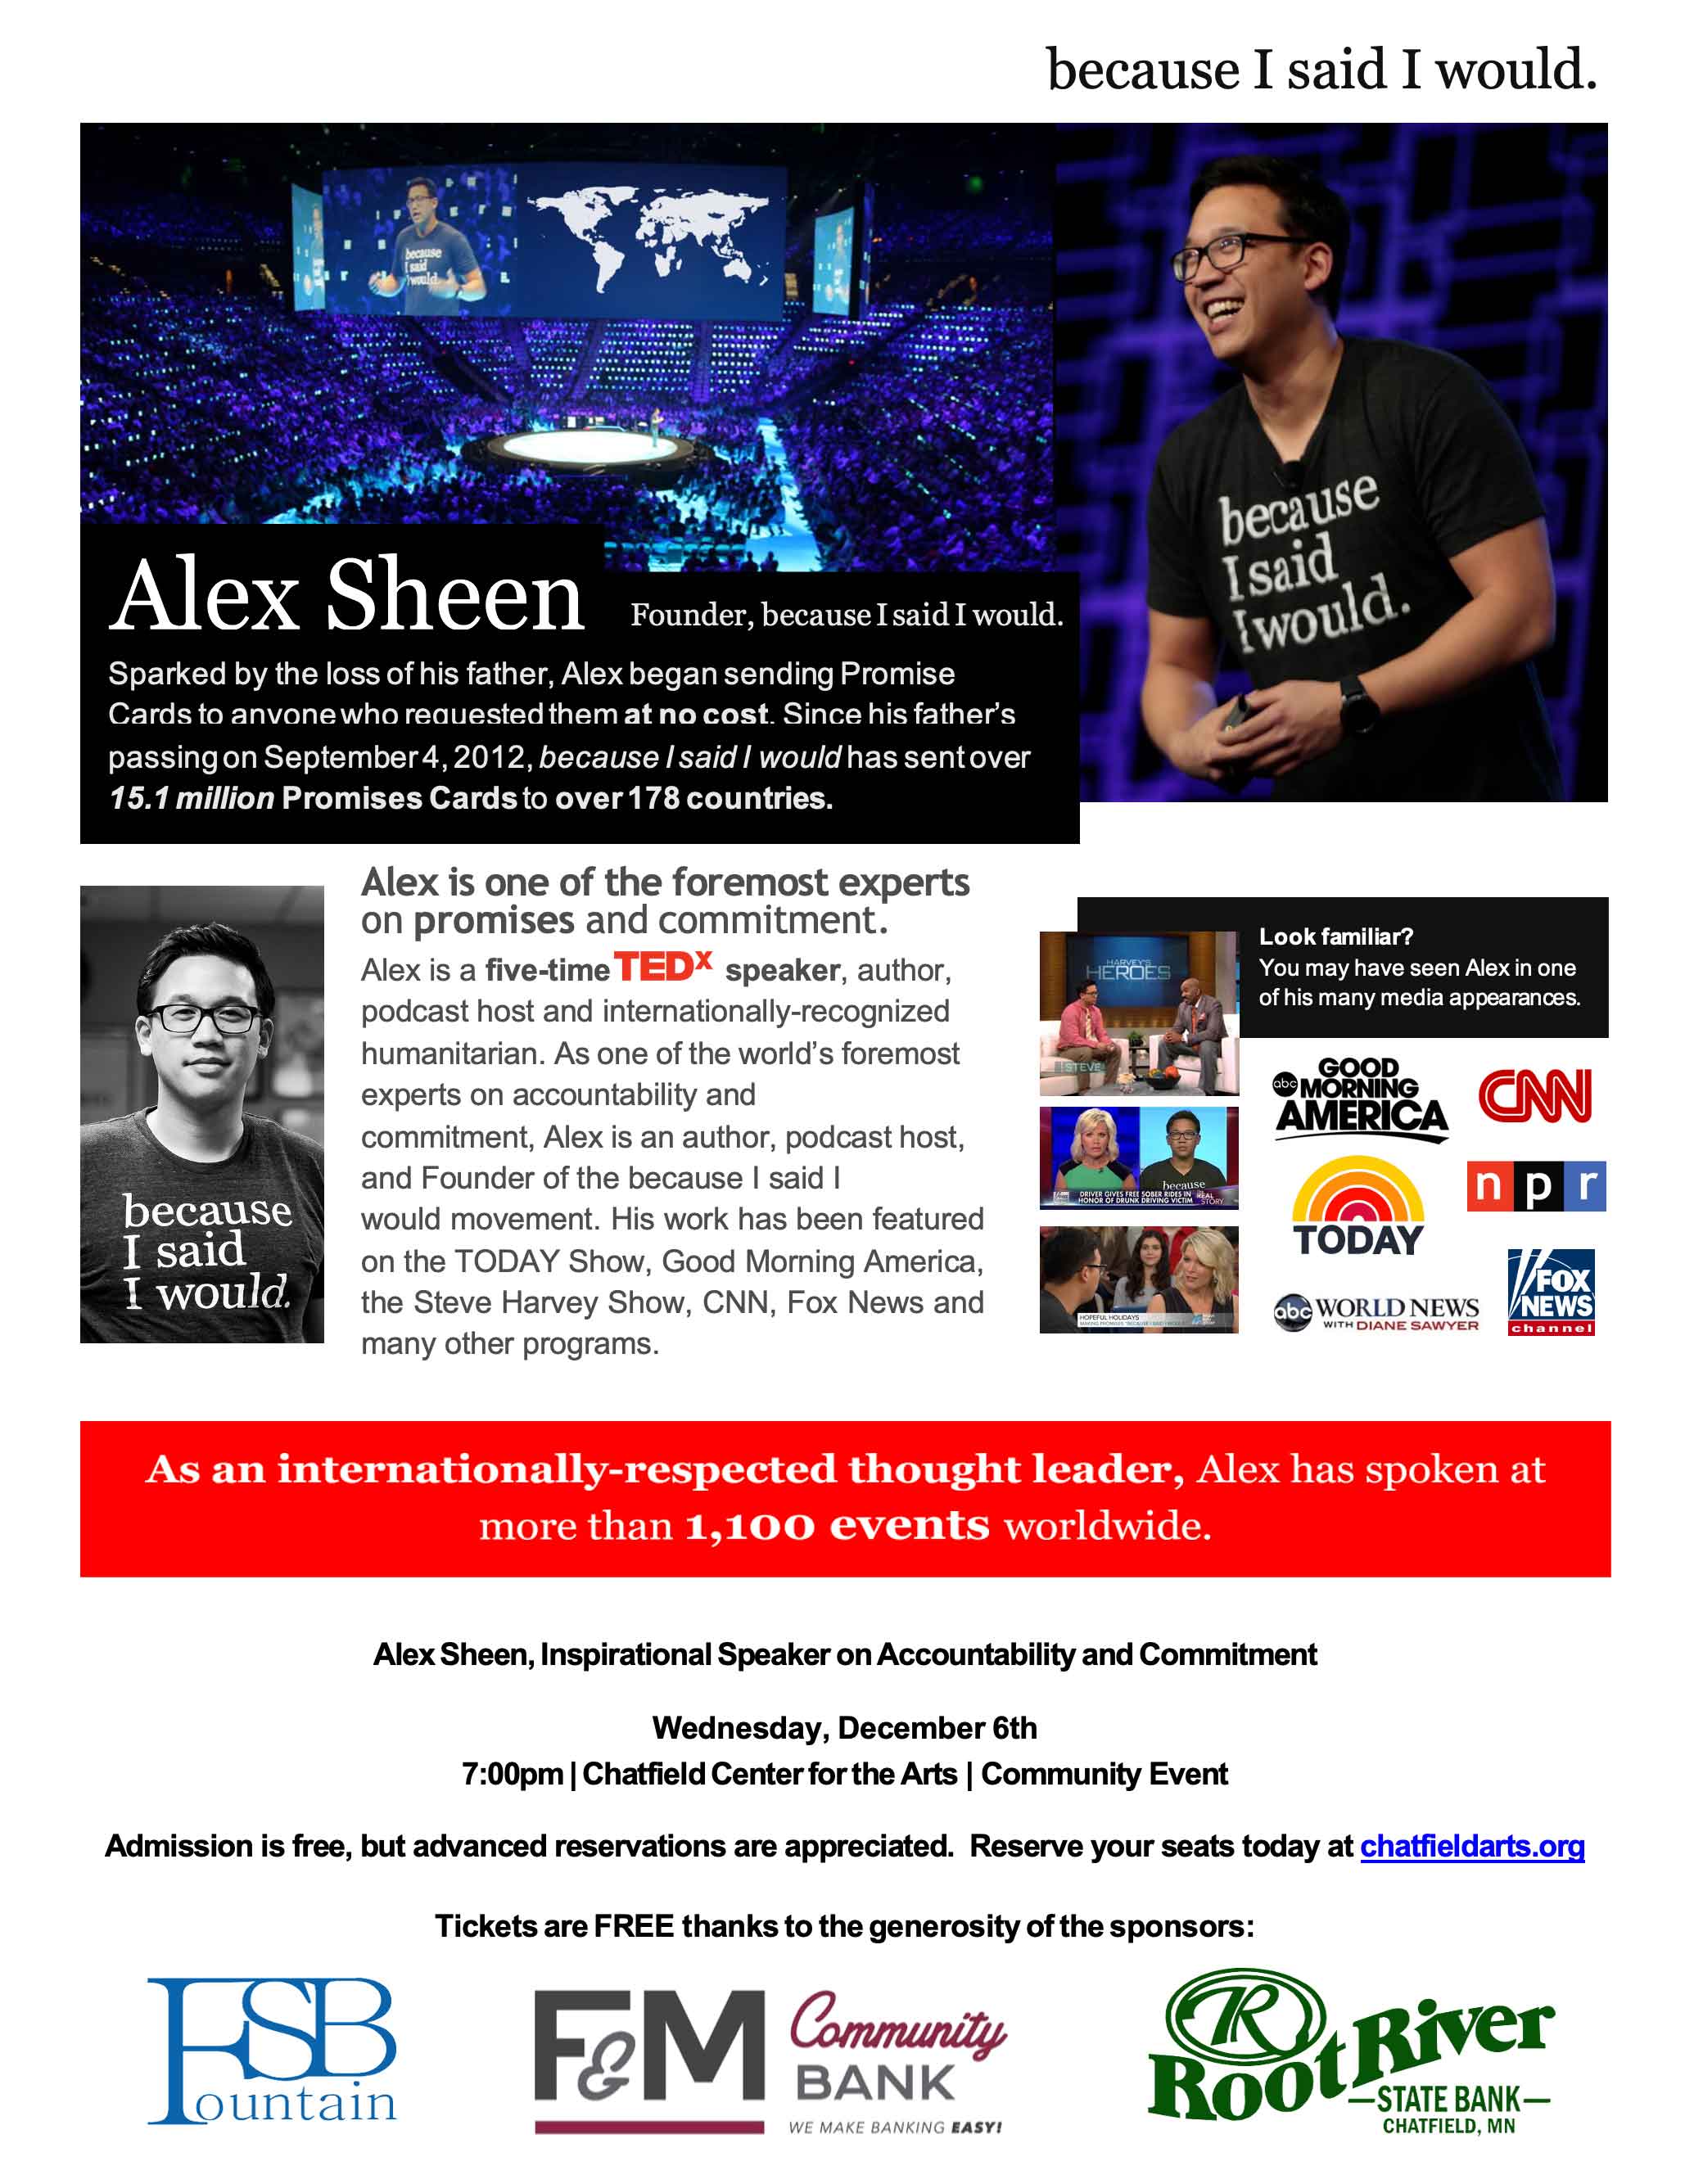 Alex Sheen, Inspirational Speaker on Accountability and Commitment. Wednesday, December 6th 7:00pm, Chatfield Center for the Arts, Community Event. Admission is free, but advanced reservations are appreciated. Reserve your seats today at chatfieldarts.org. Tickets are free thanks to the generosity of the sponsors.